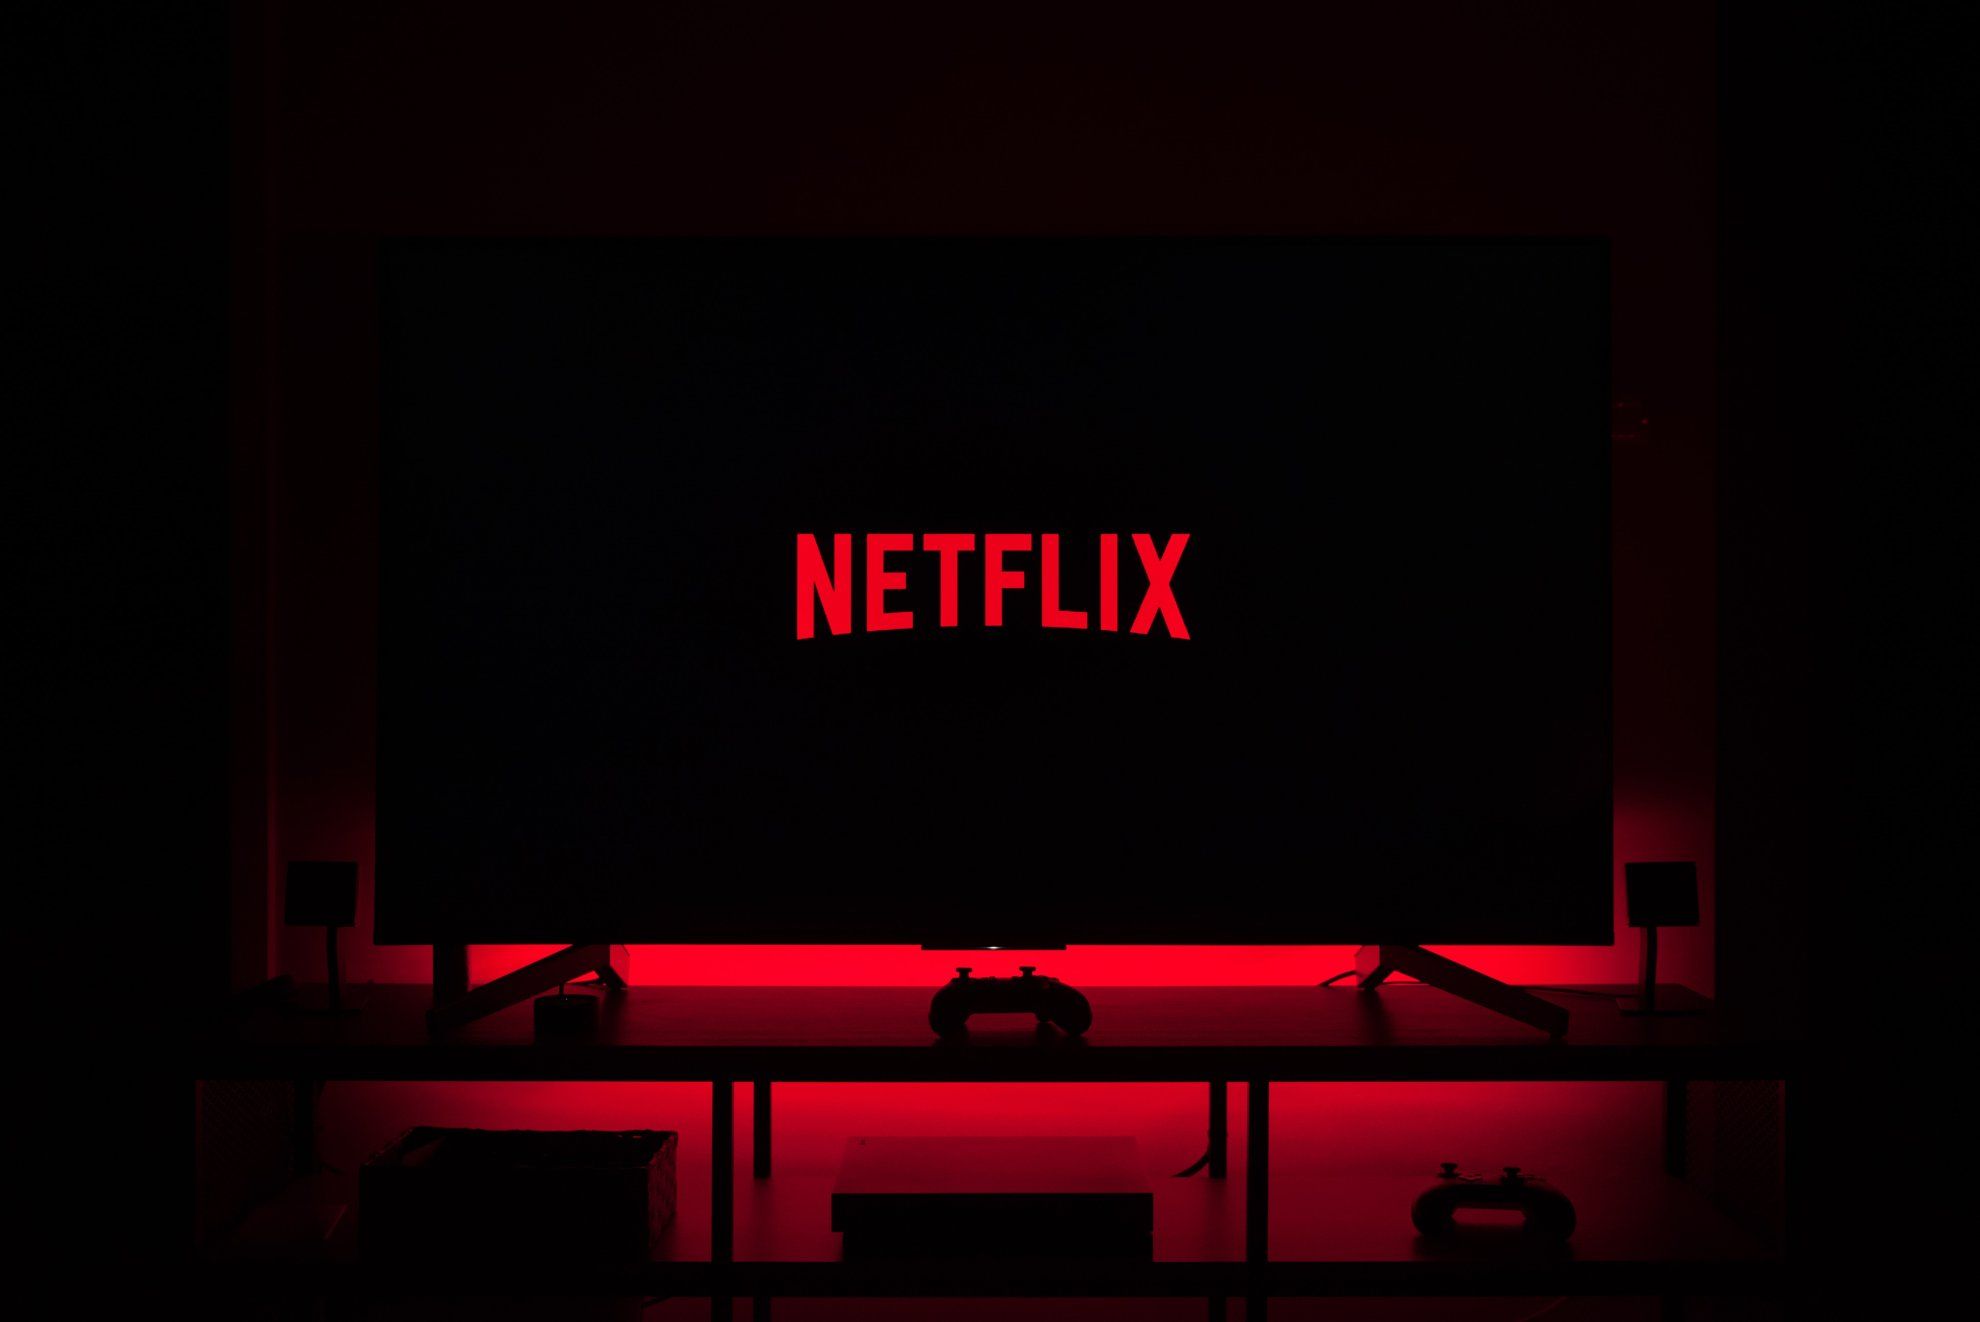 Buy access to Netflix resources from $ 